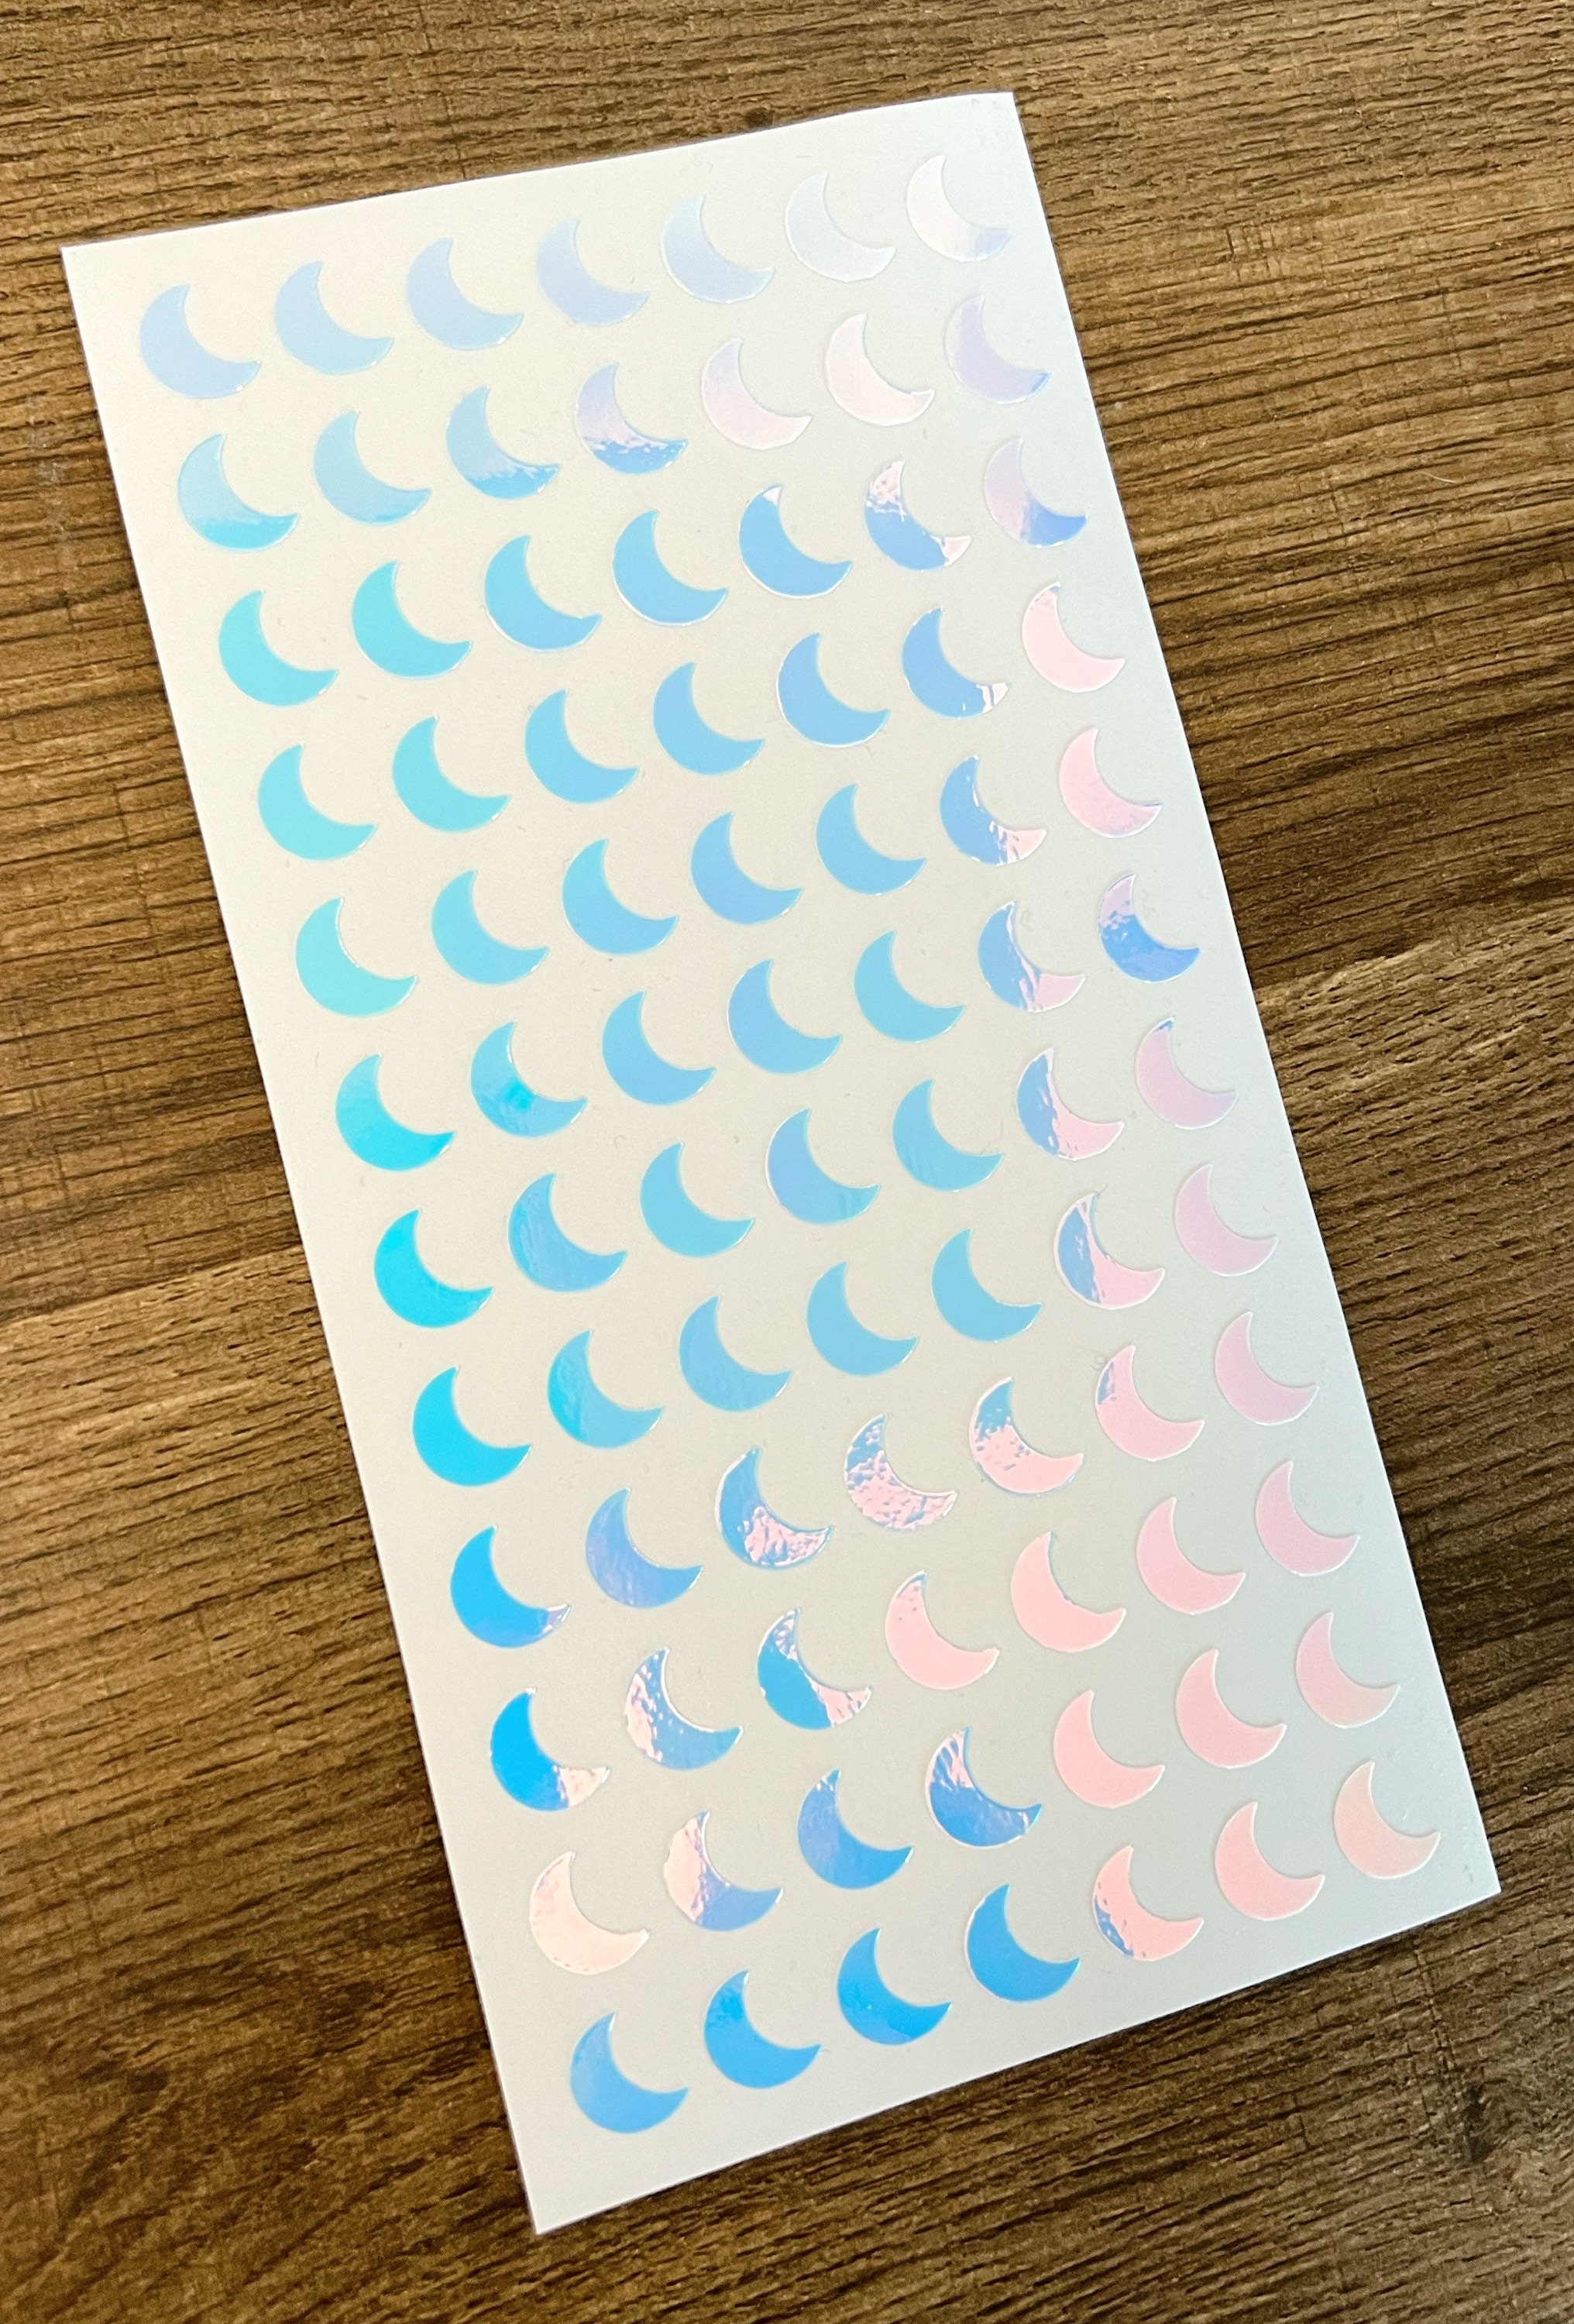 Clear Sticker Paper Printable Transparent Sticker Paper A4 Size Waterproof Decal  Paper Blank Custom Label Sticker Sheets for Inkjet and Laser Printer (22)  price in Saudi Arabia,  Saudi Arabia